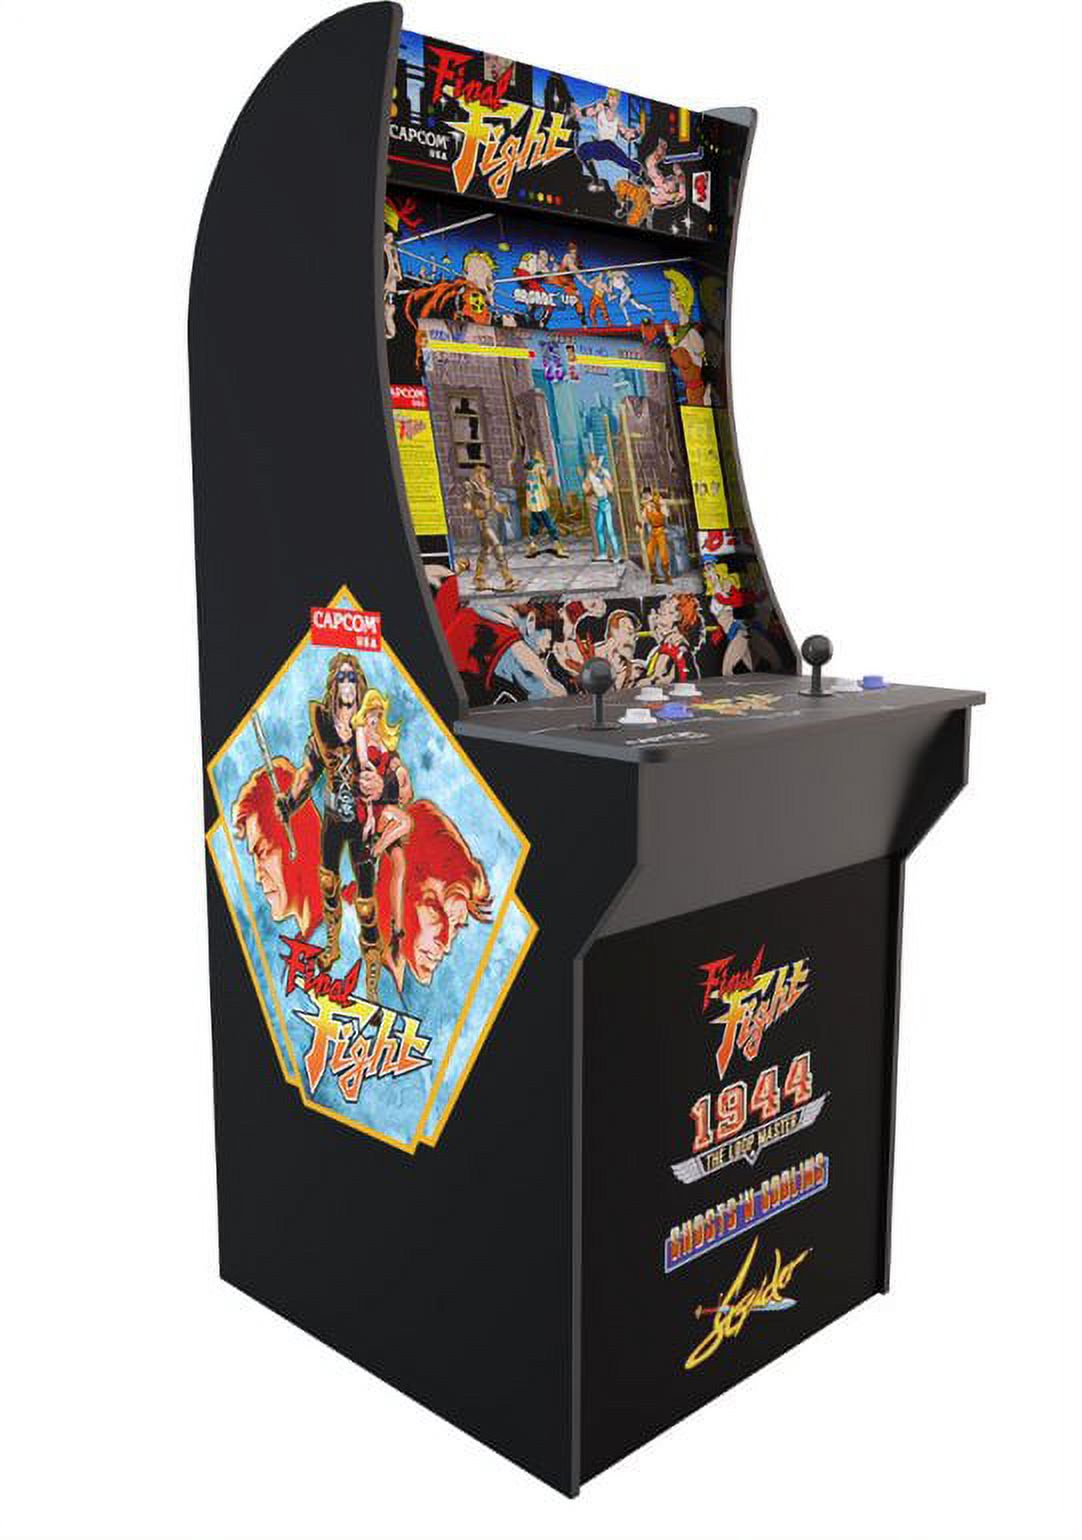 Arcade1Up, Final Fight Arcade Machine without riser - image 1 of 5